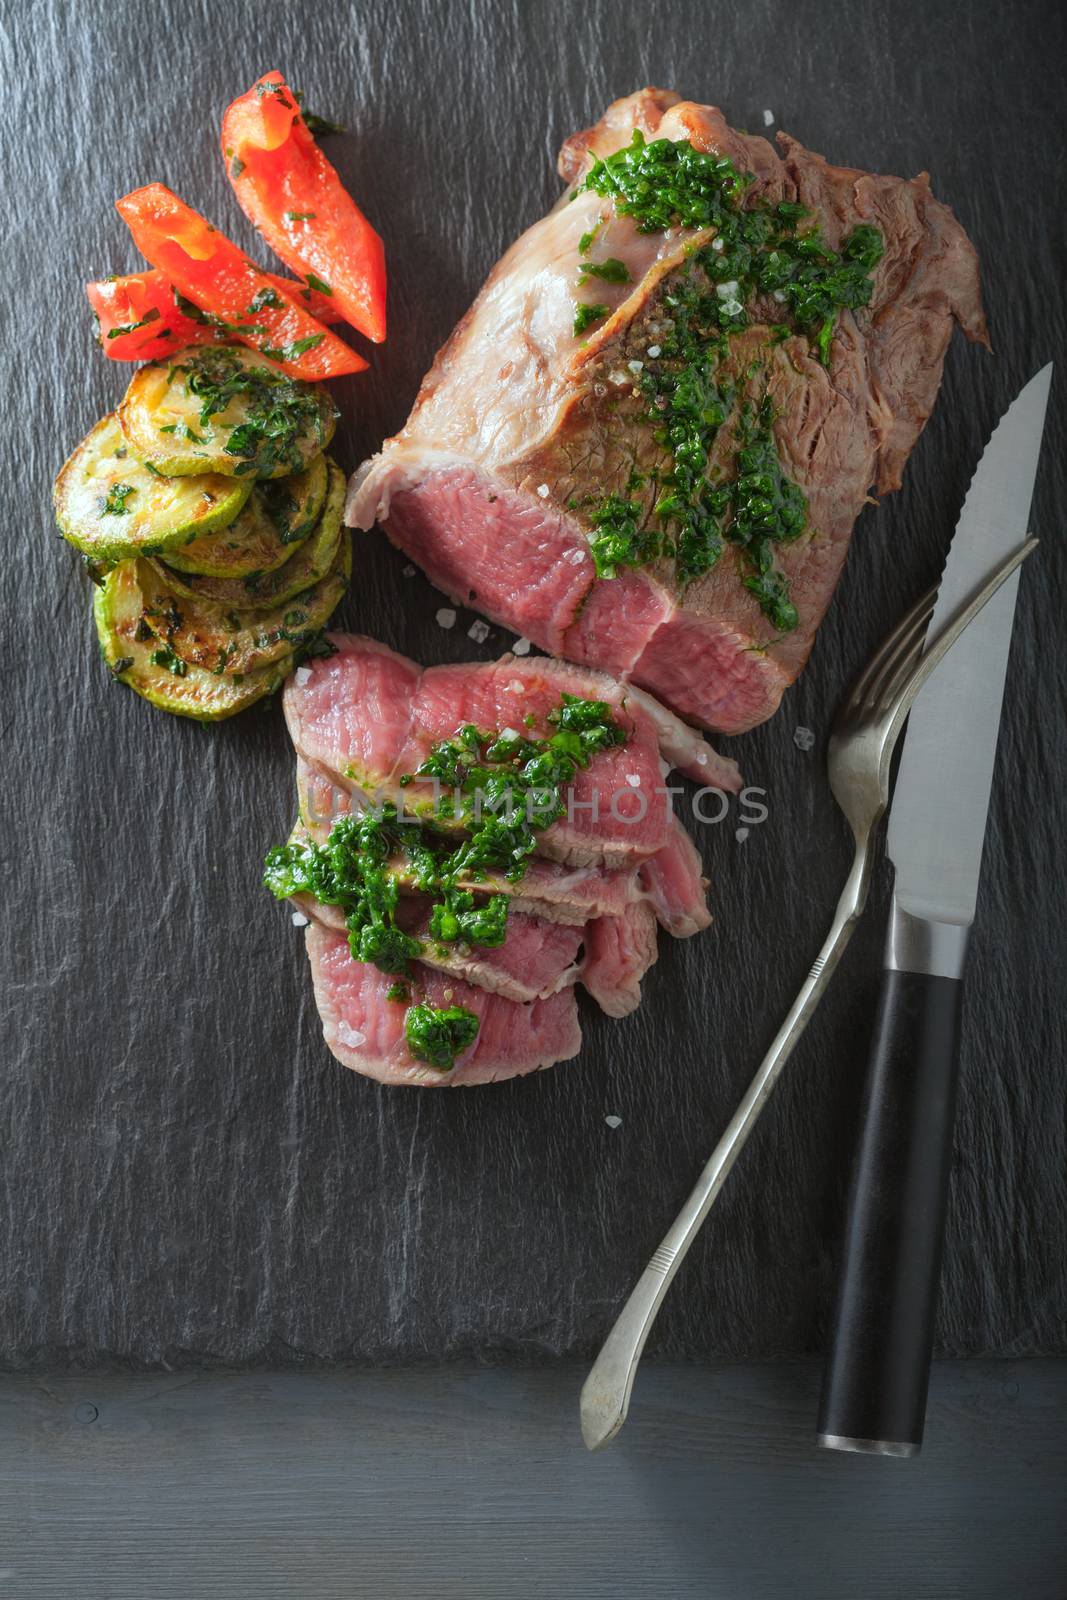 Roast Beef dinner with roasted zucchini by supercat67